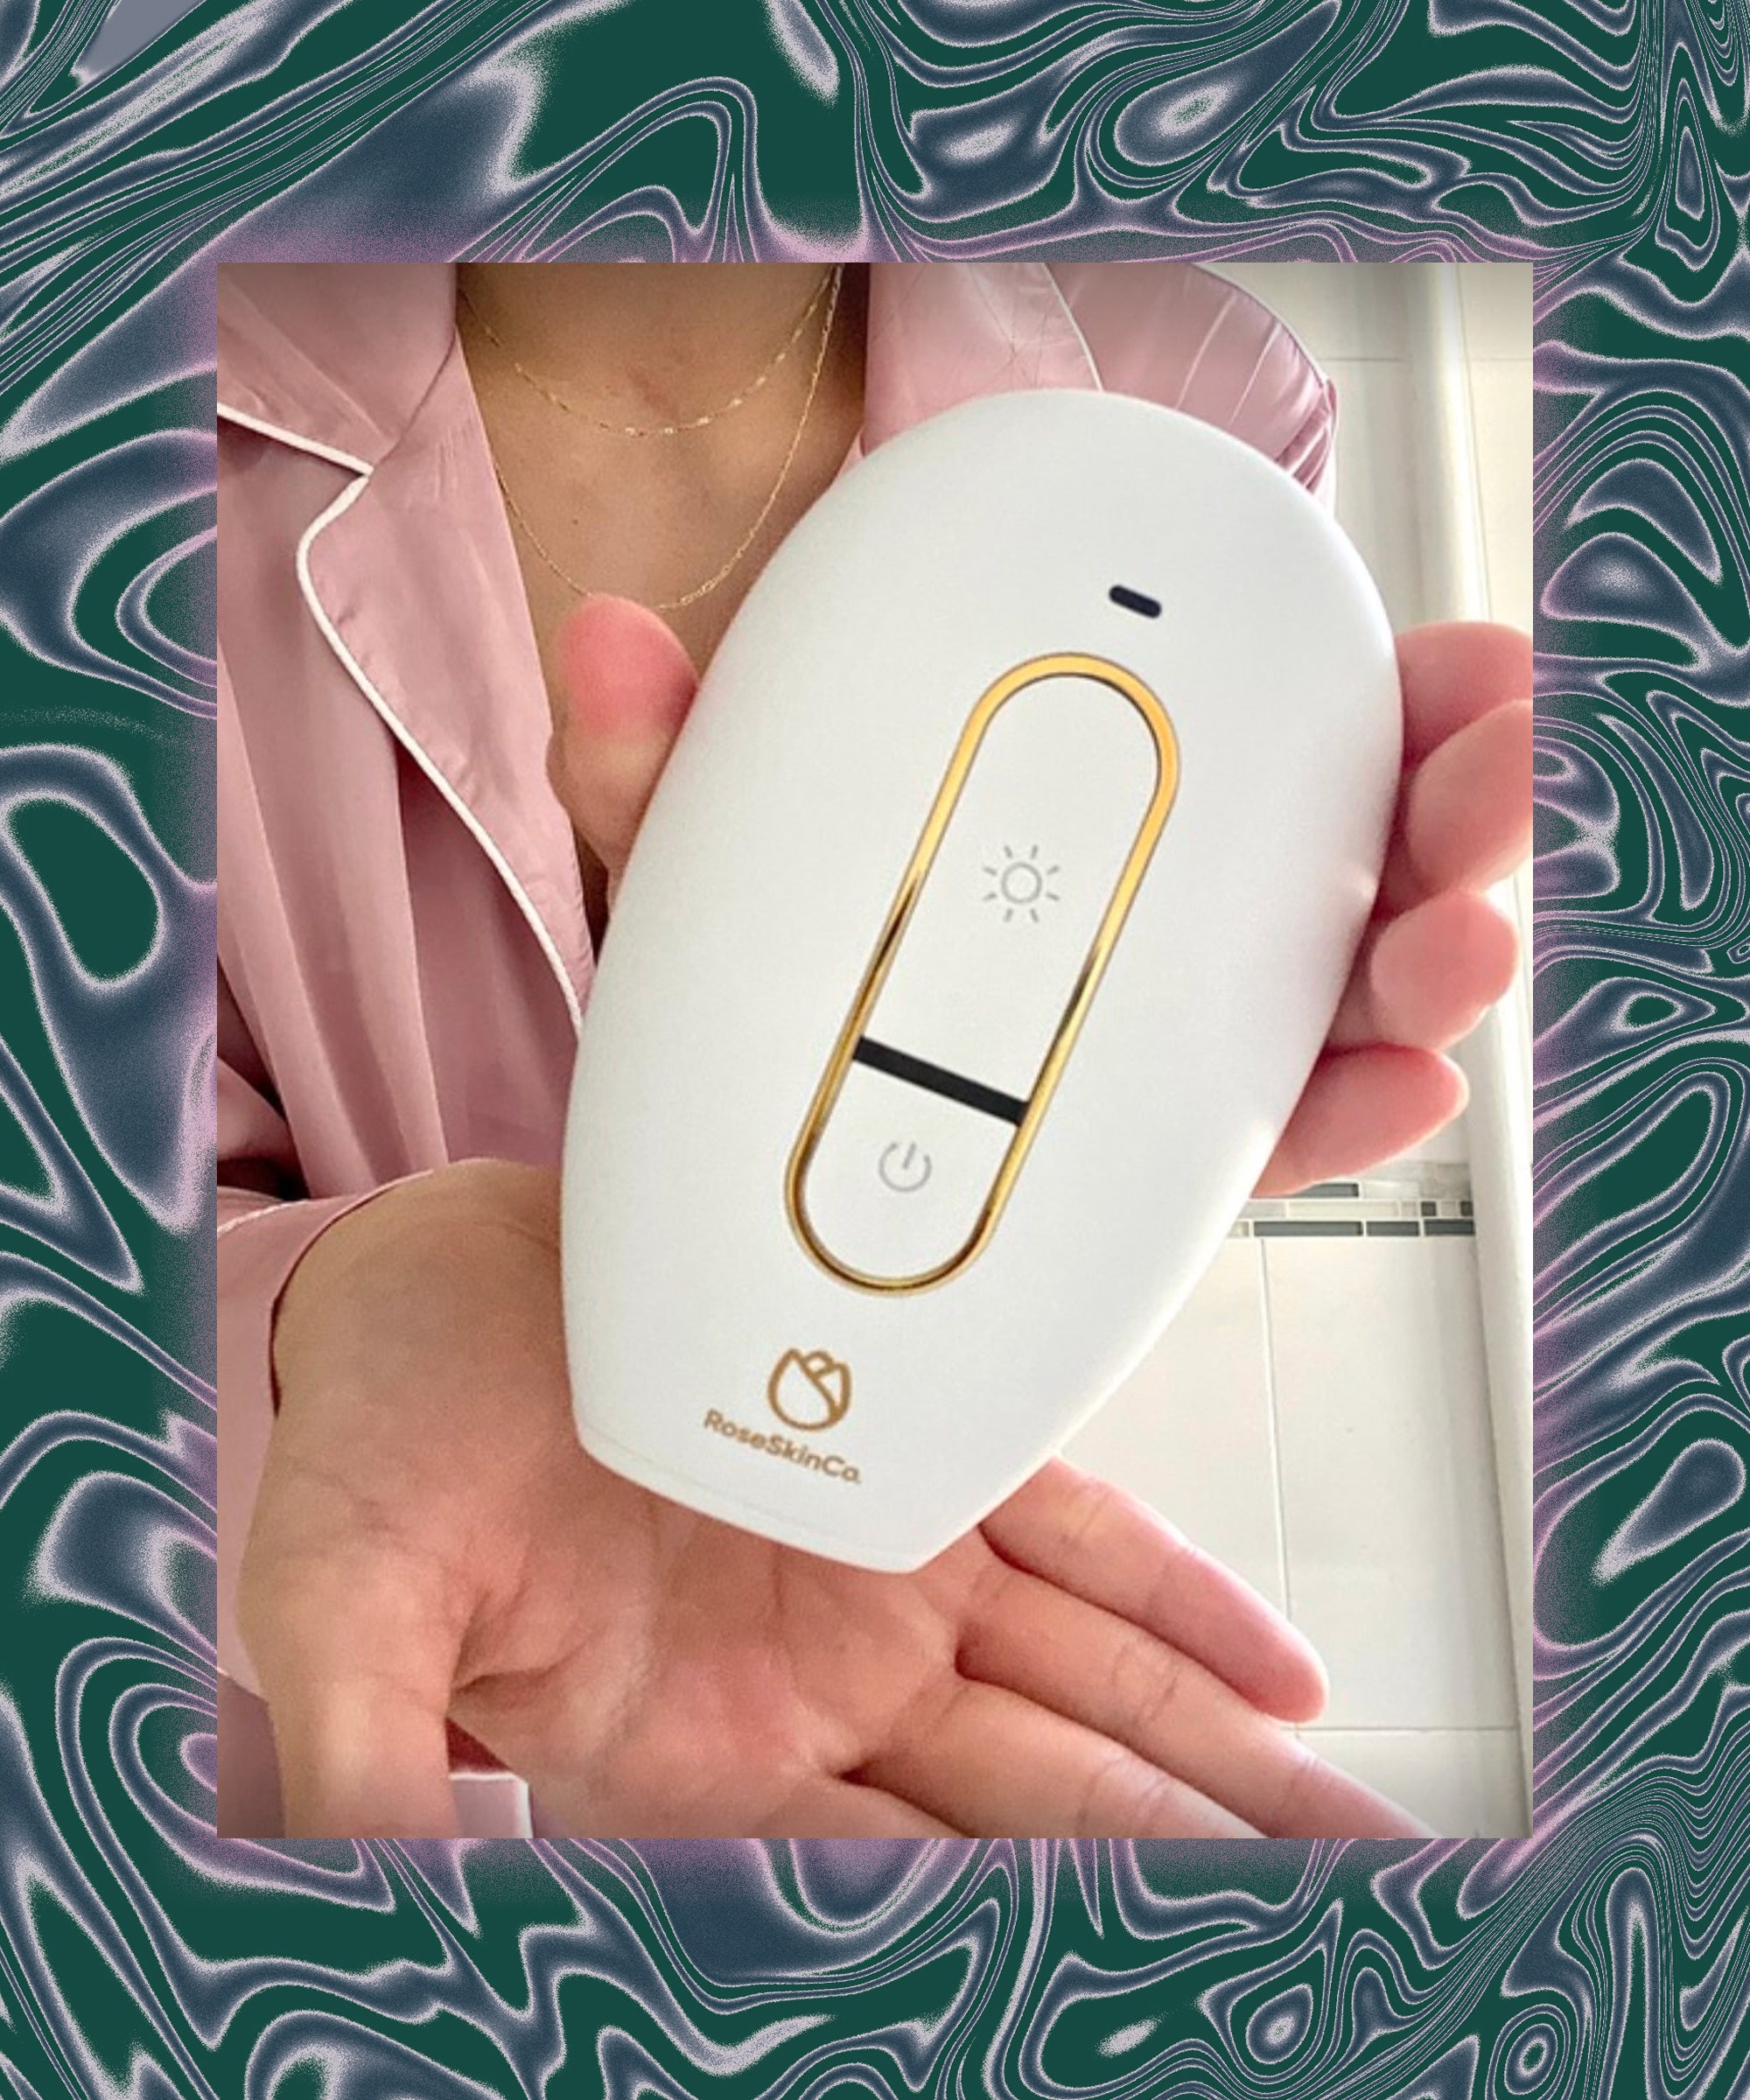 Lumi - Permanent Hair Removal Device – RoseSkinCo.